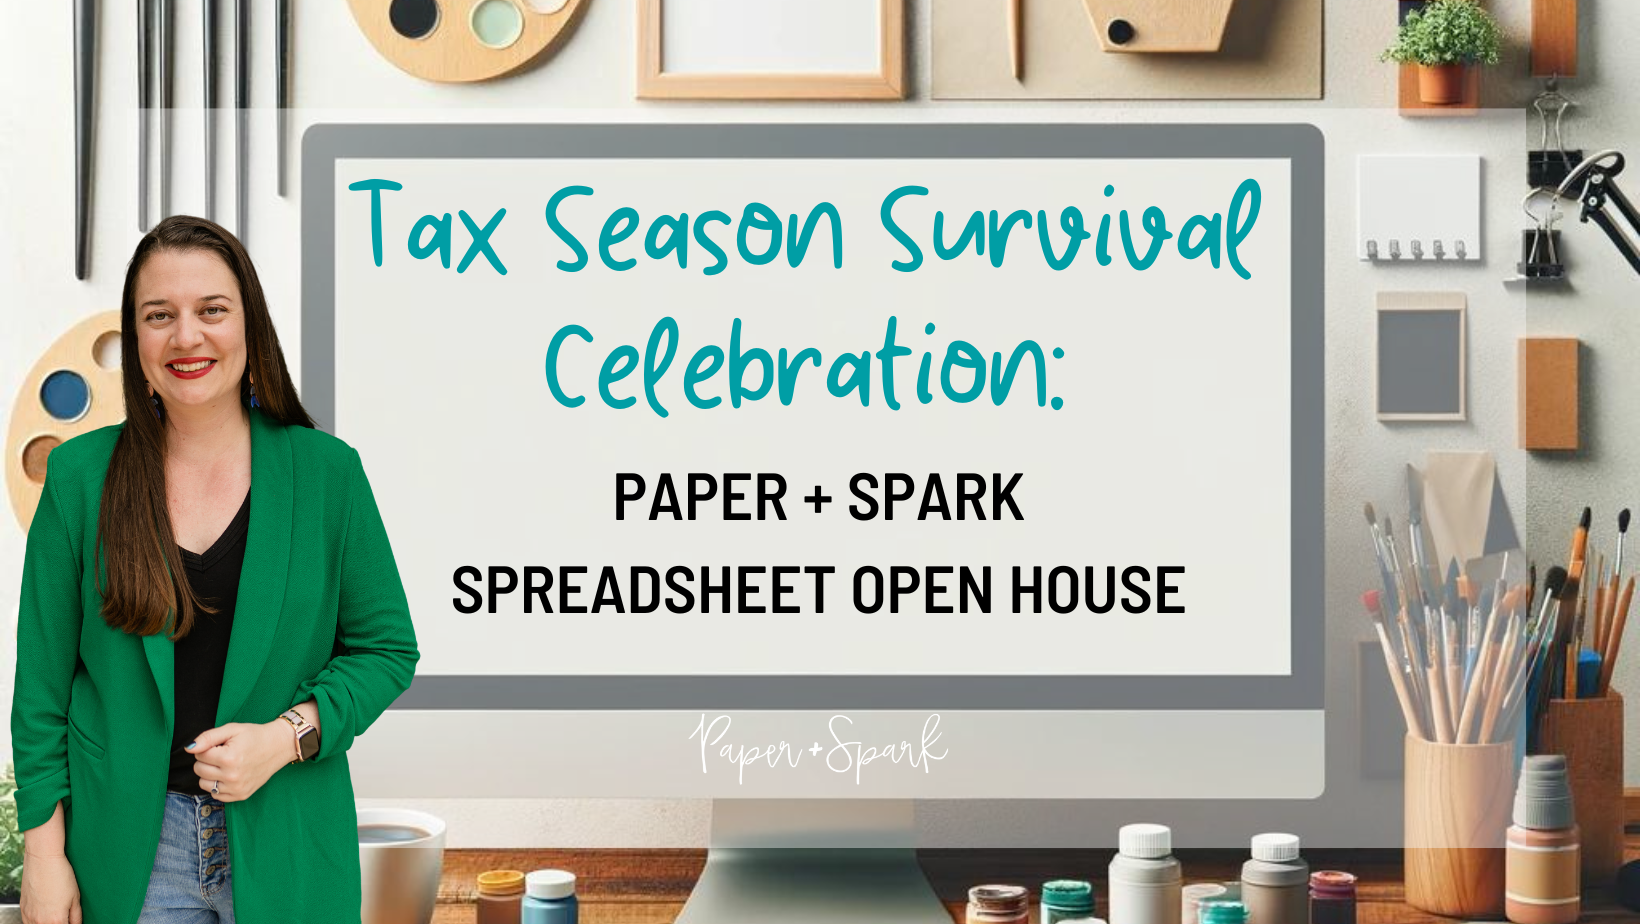 Spreadsheet Open House with Paper + Spark event cover photo